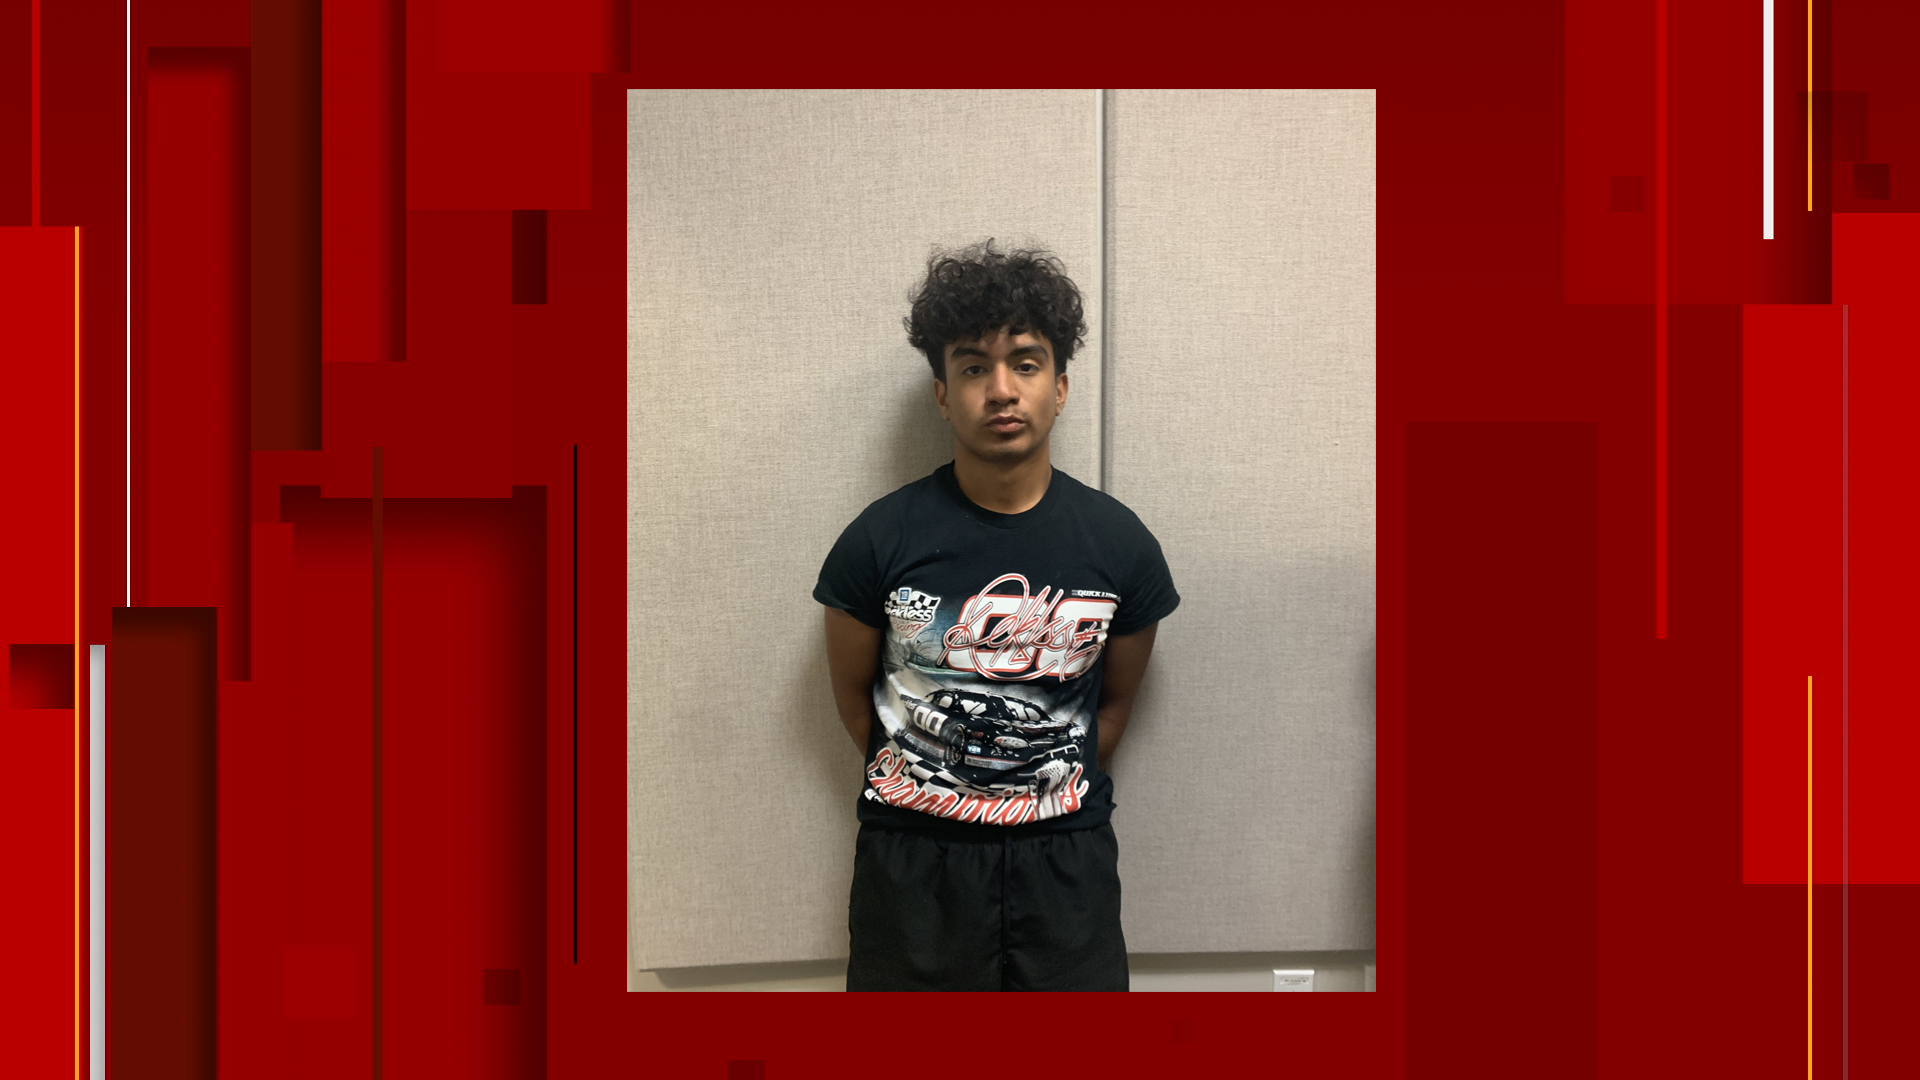 Xxx Beby - Man, 18, arrested for child pornography, sex assault of a 14-year-old girl,  BCSO says